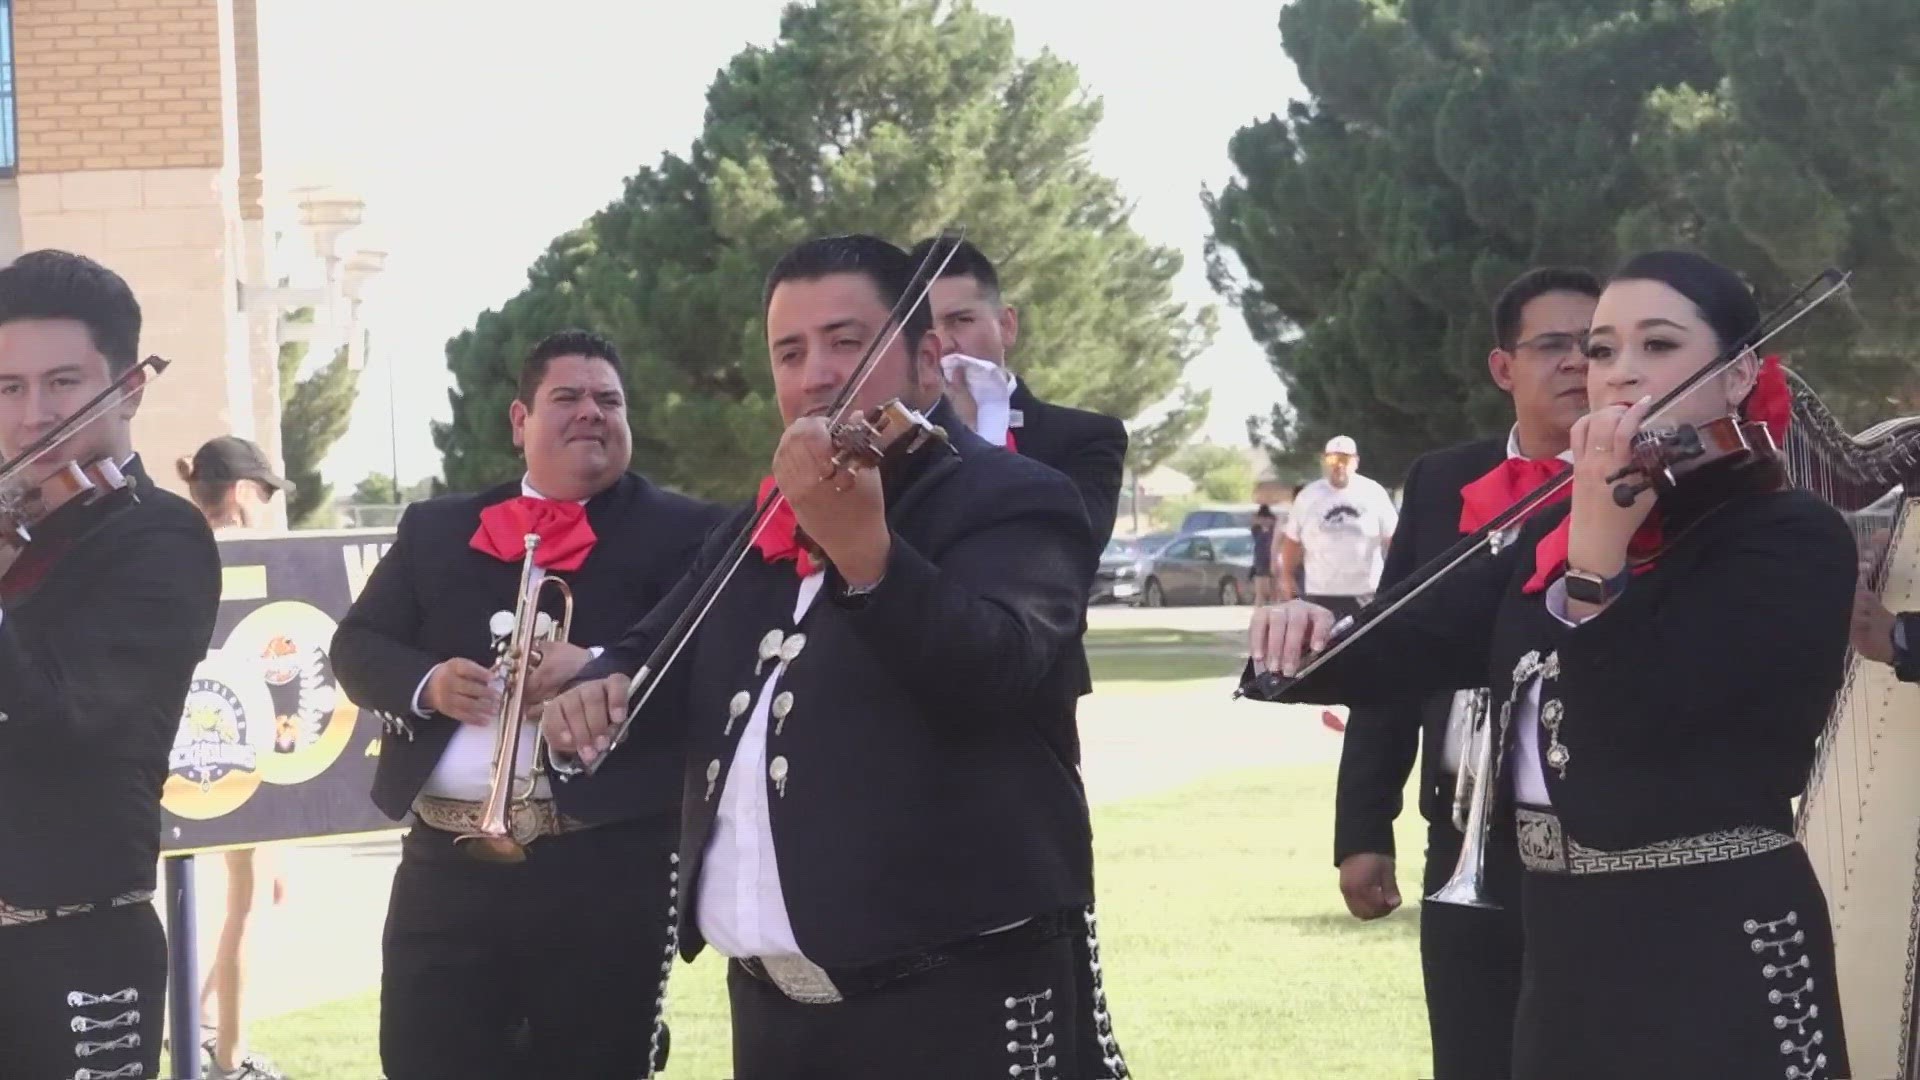 This all leads up to “Noche de Mariachi” Friday night at Midland College.